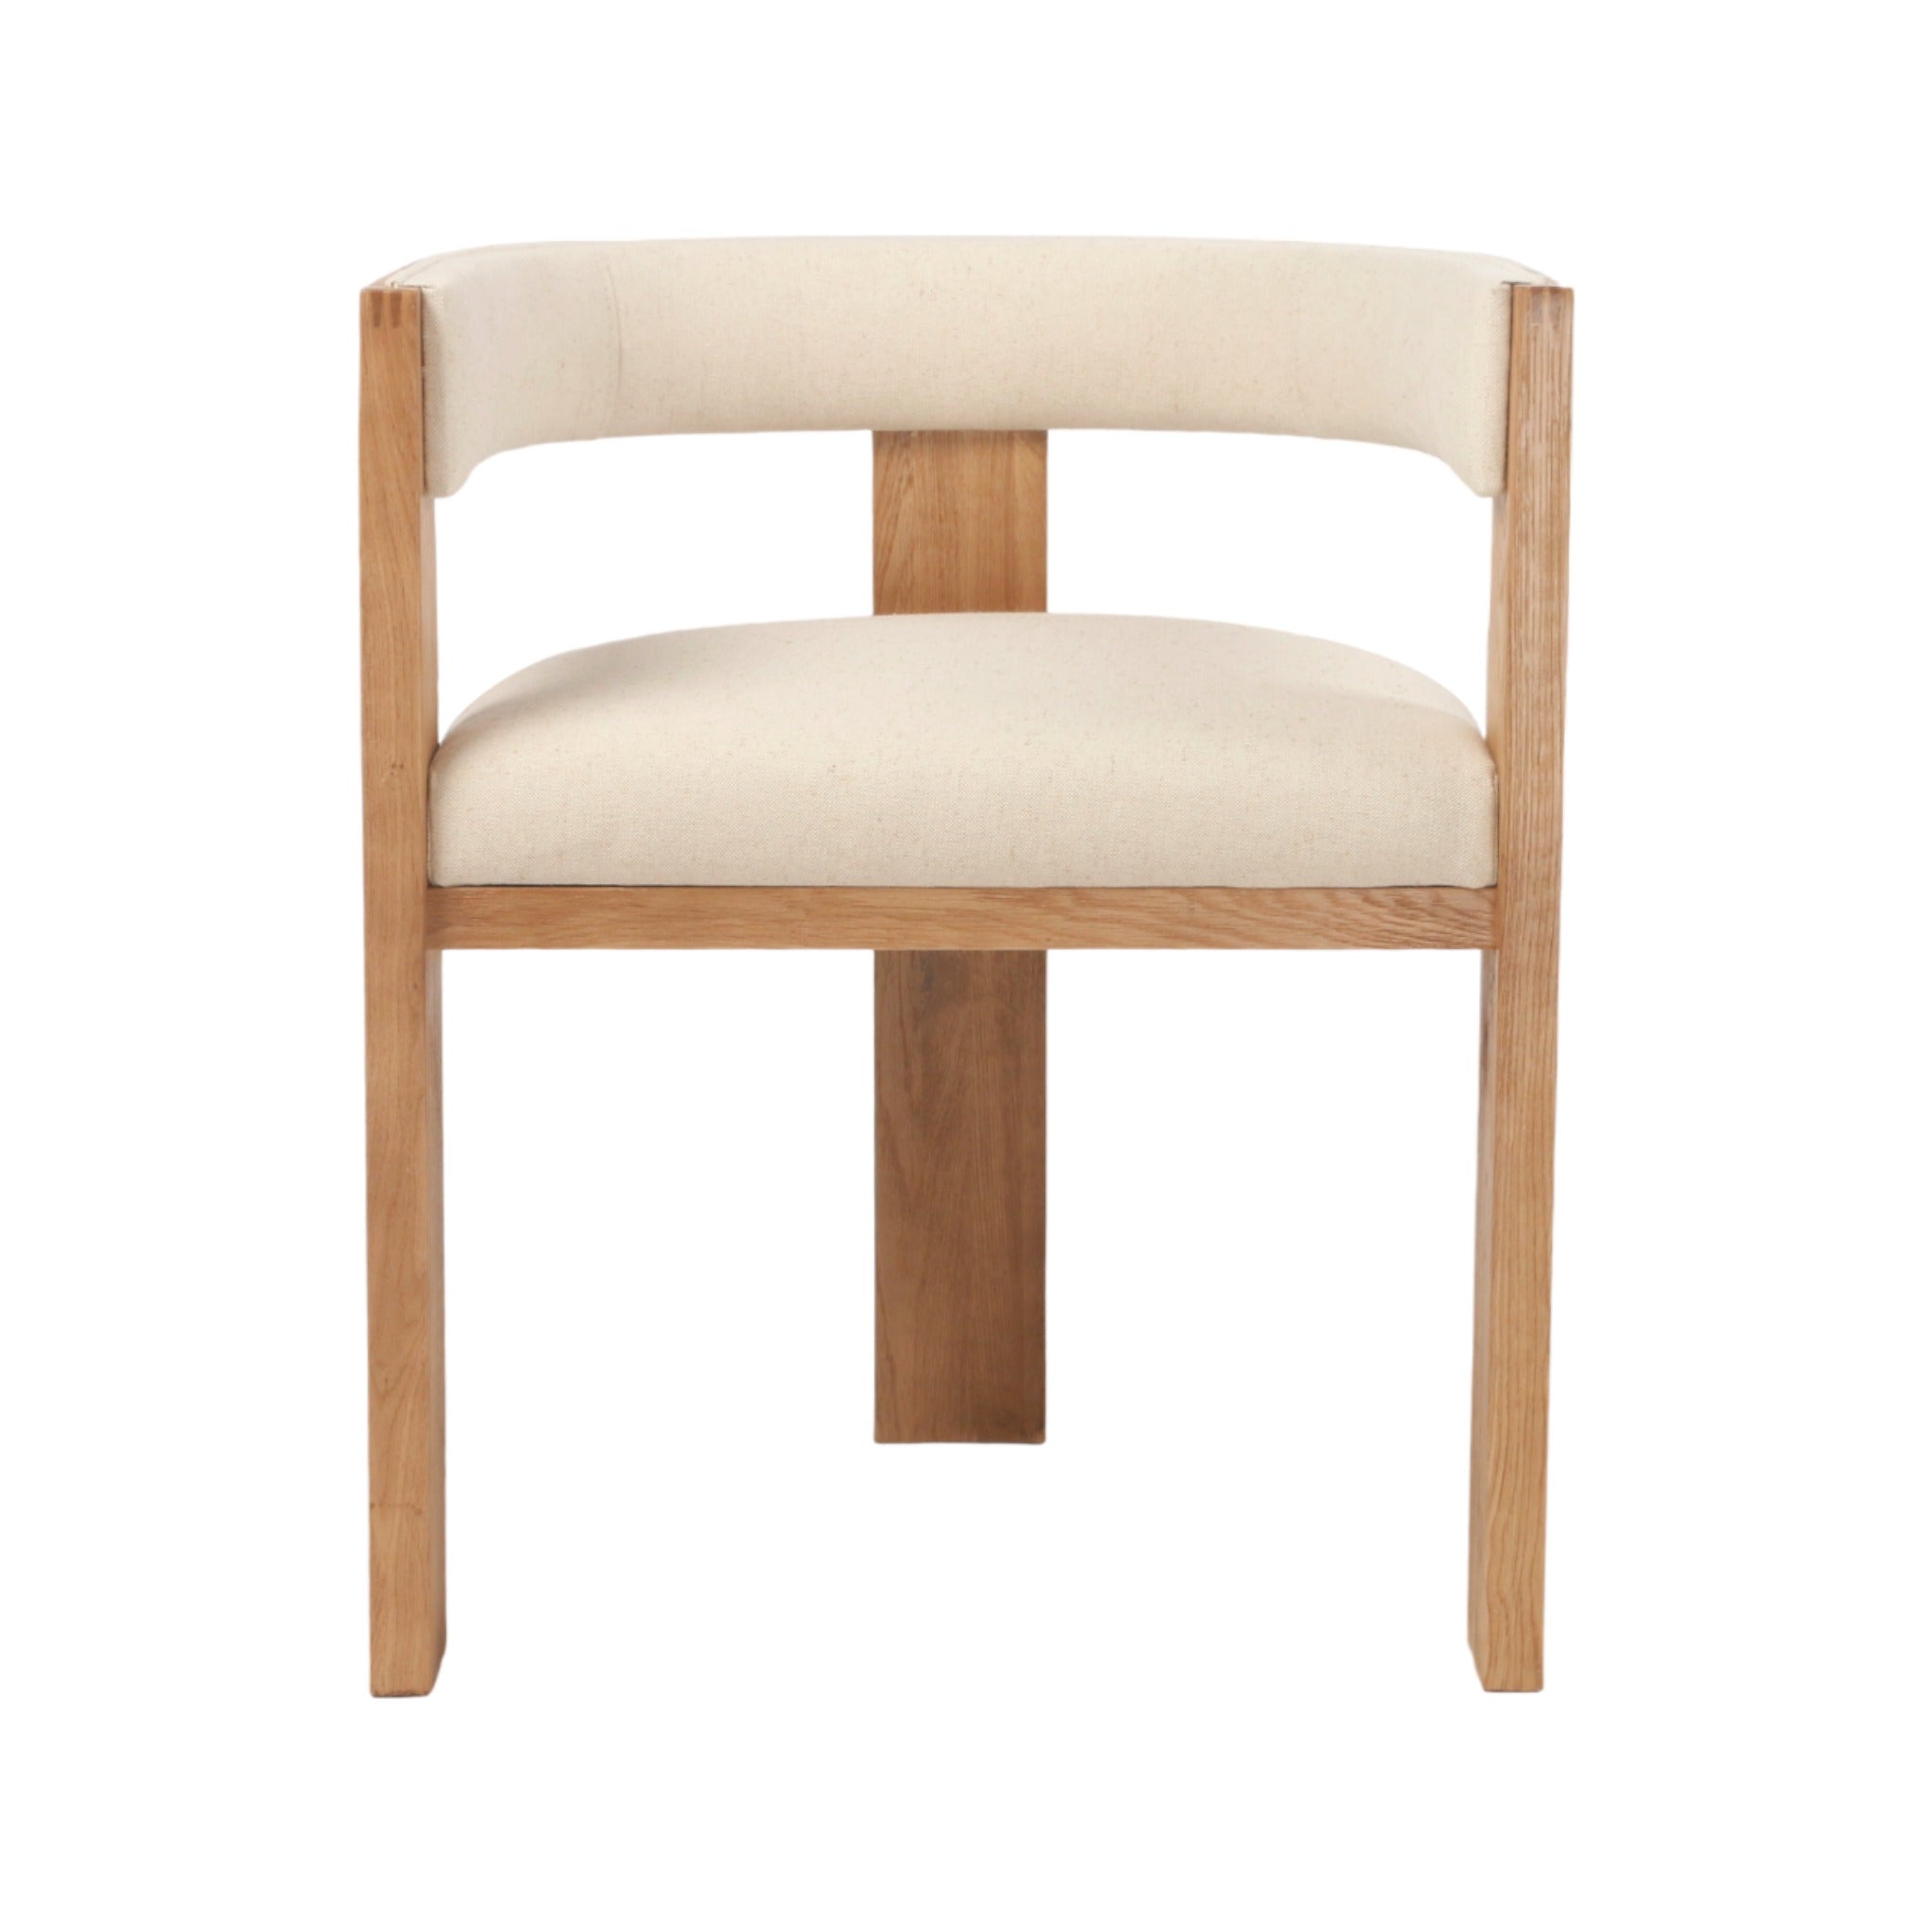 Set of 2 Elise Elm Dining Chair - Light Beige - Dining Chairs